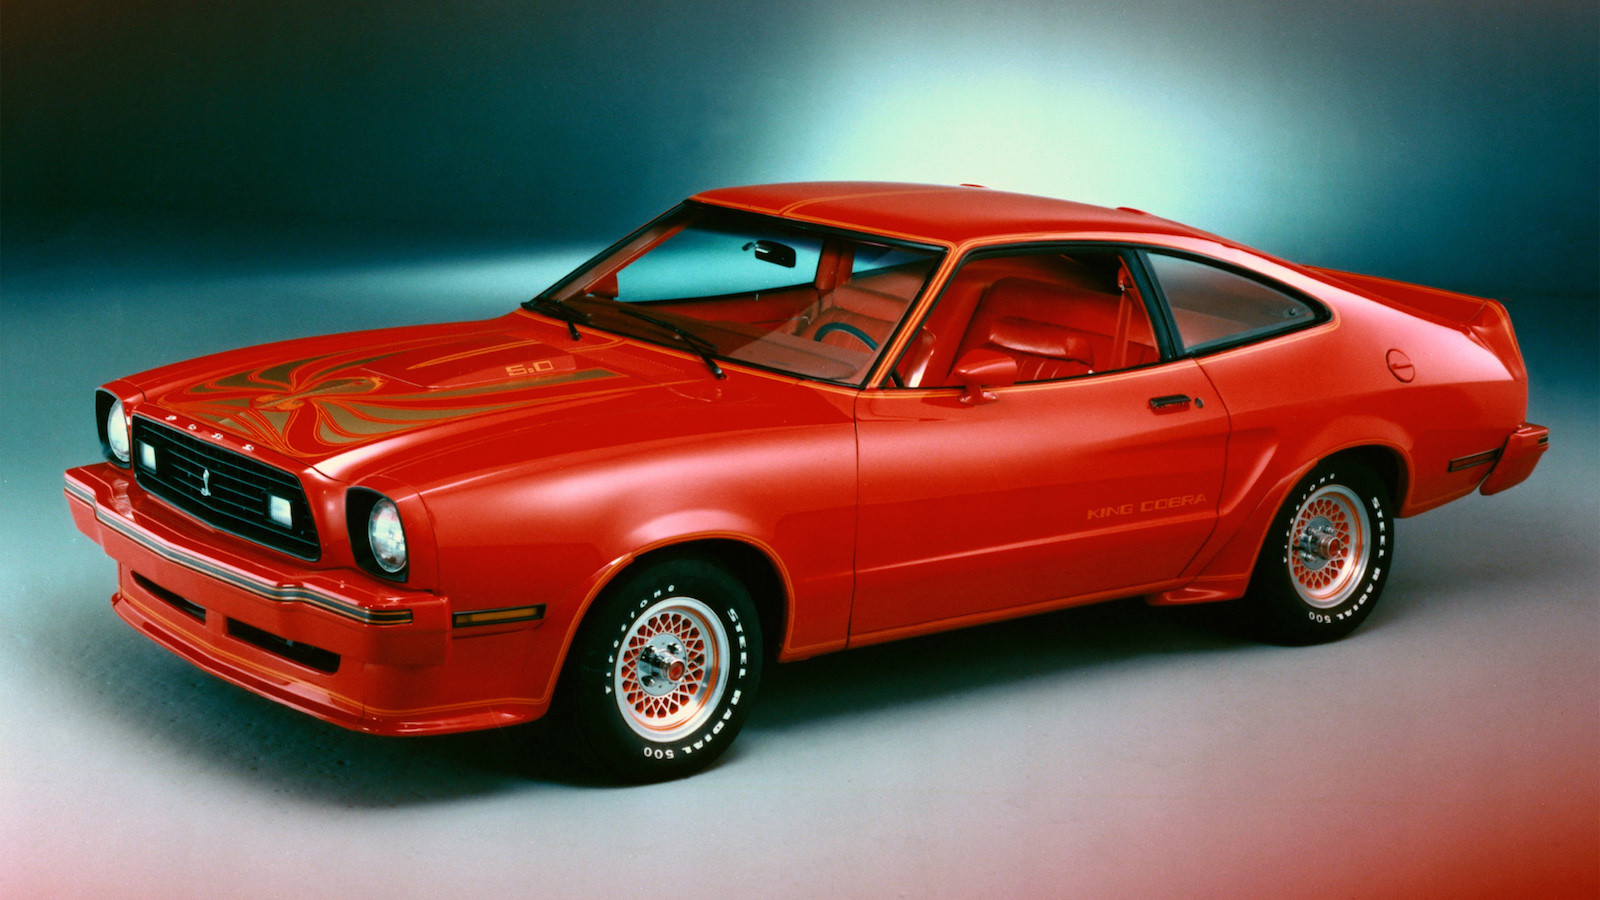 File:1974 Ford Torino from Starsky & Hutch.JPG - Wikimedia Commons